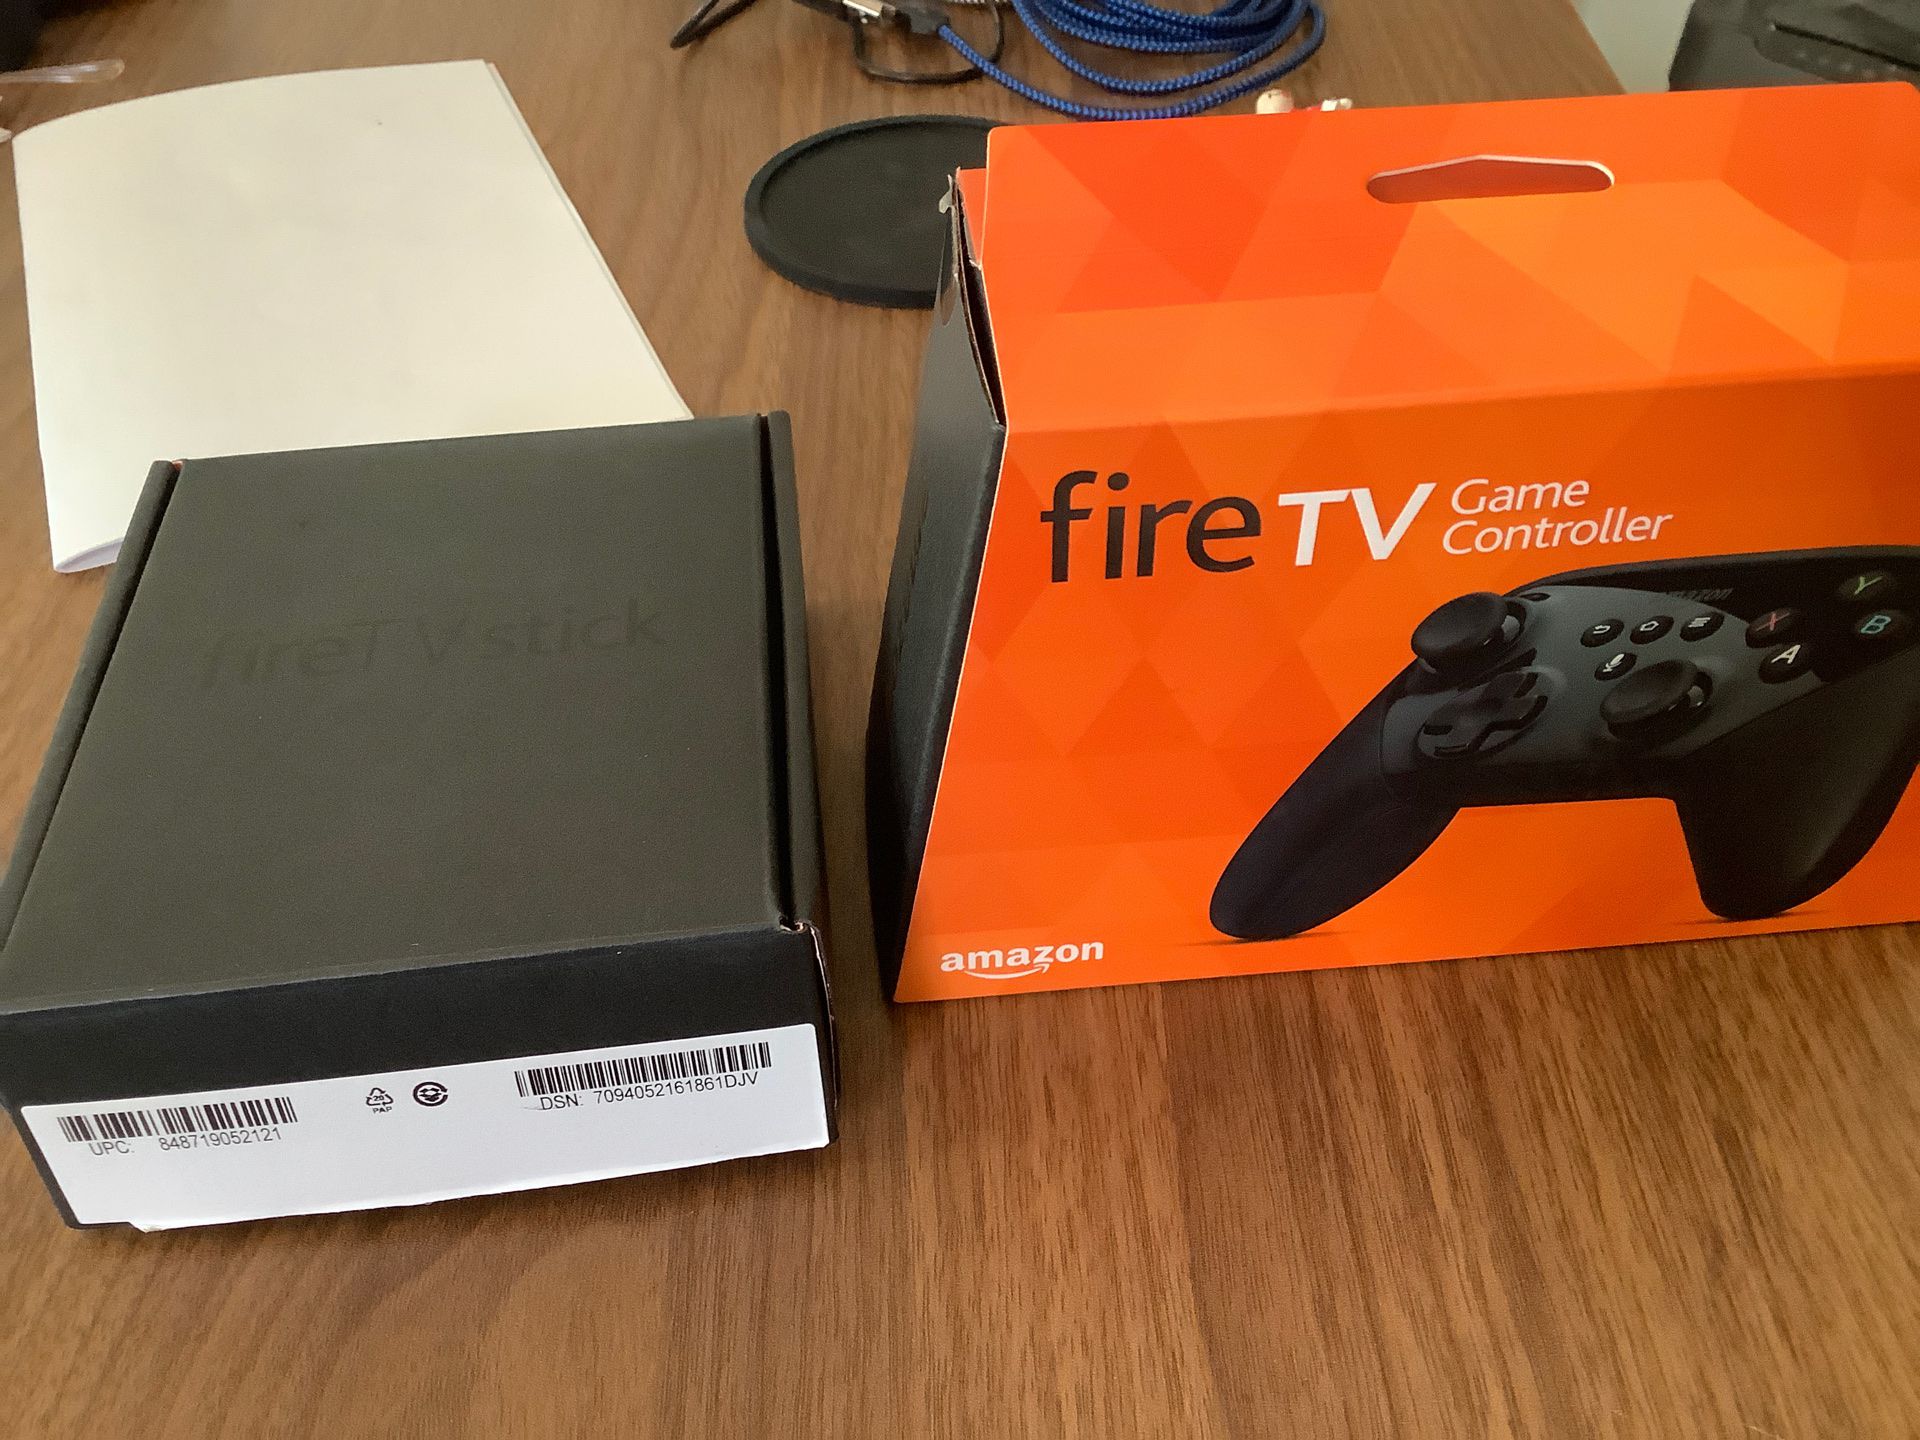 Amazon Fire Stick (3rd gen) and fire tv game controller.